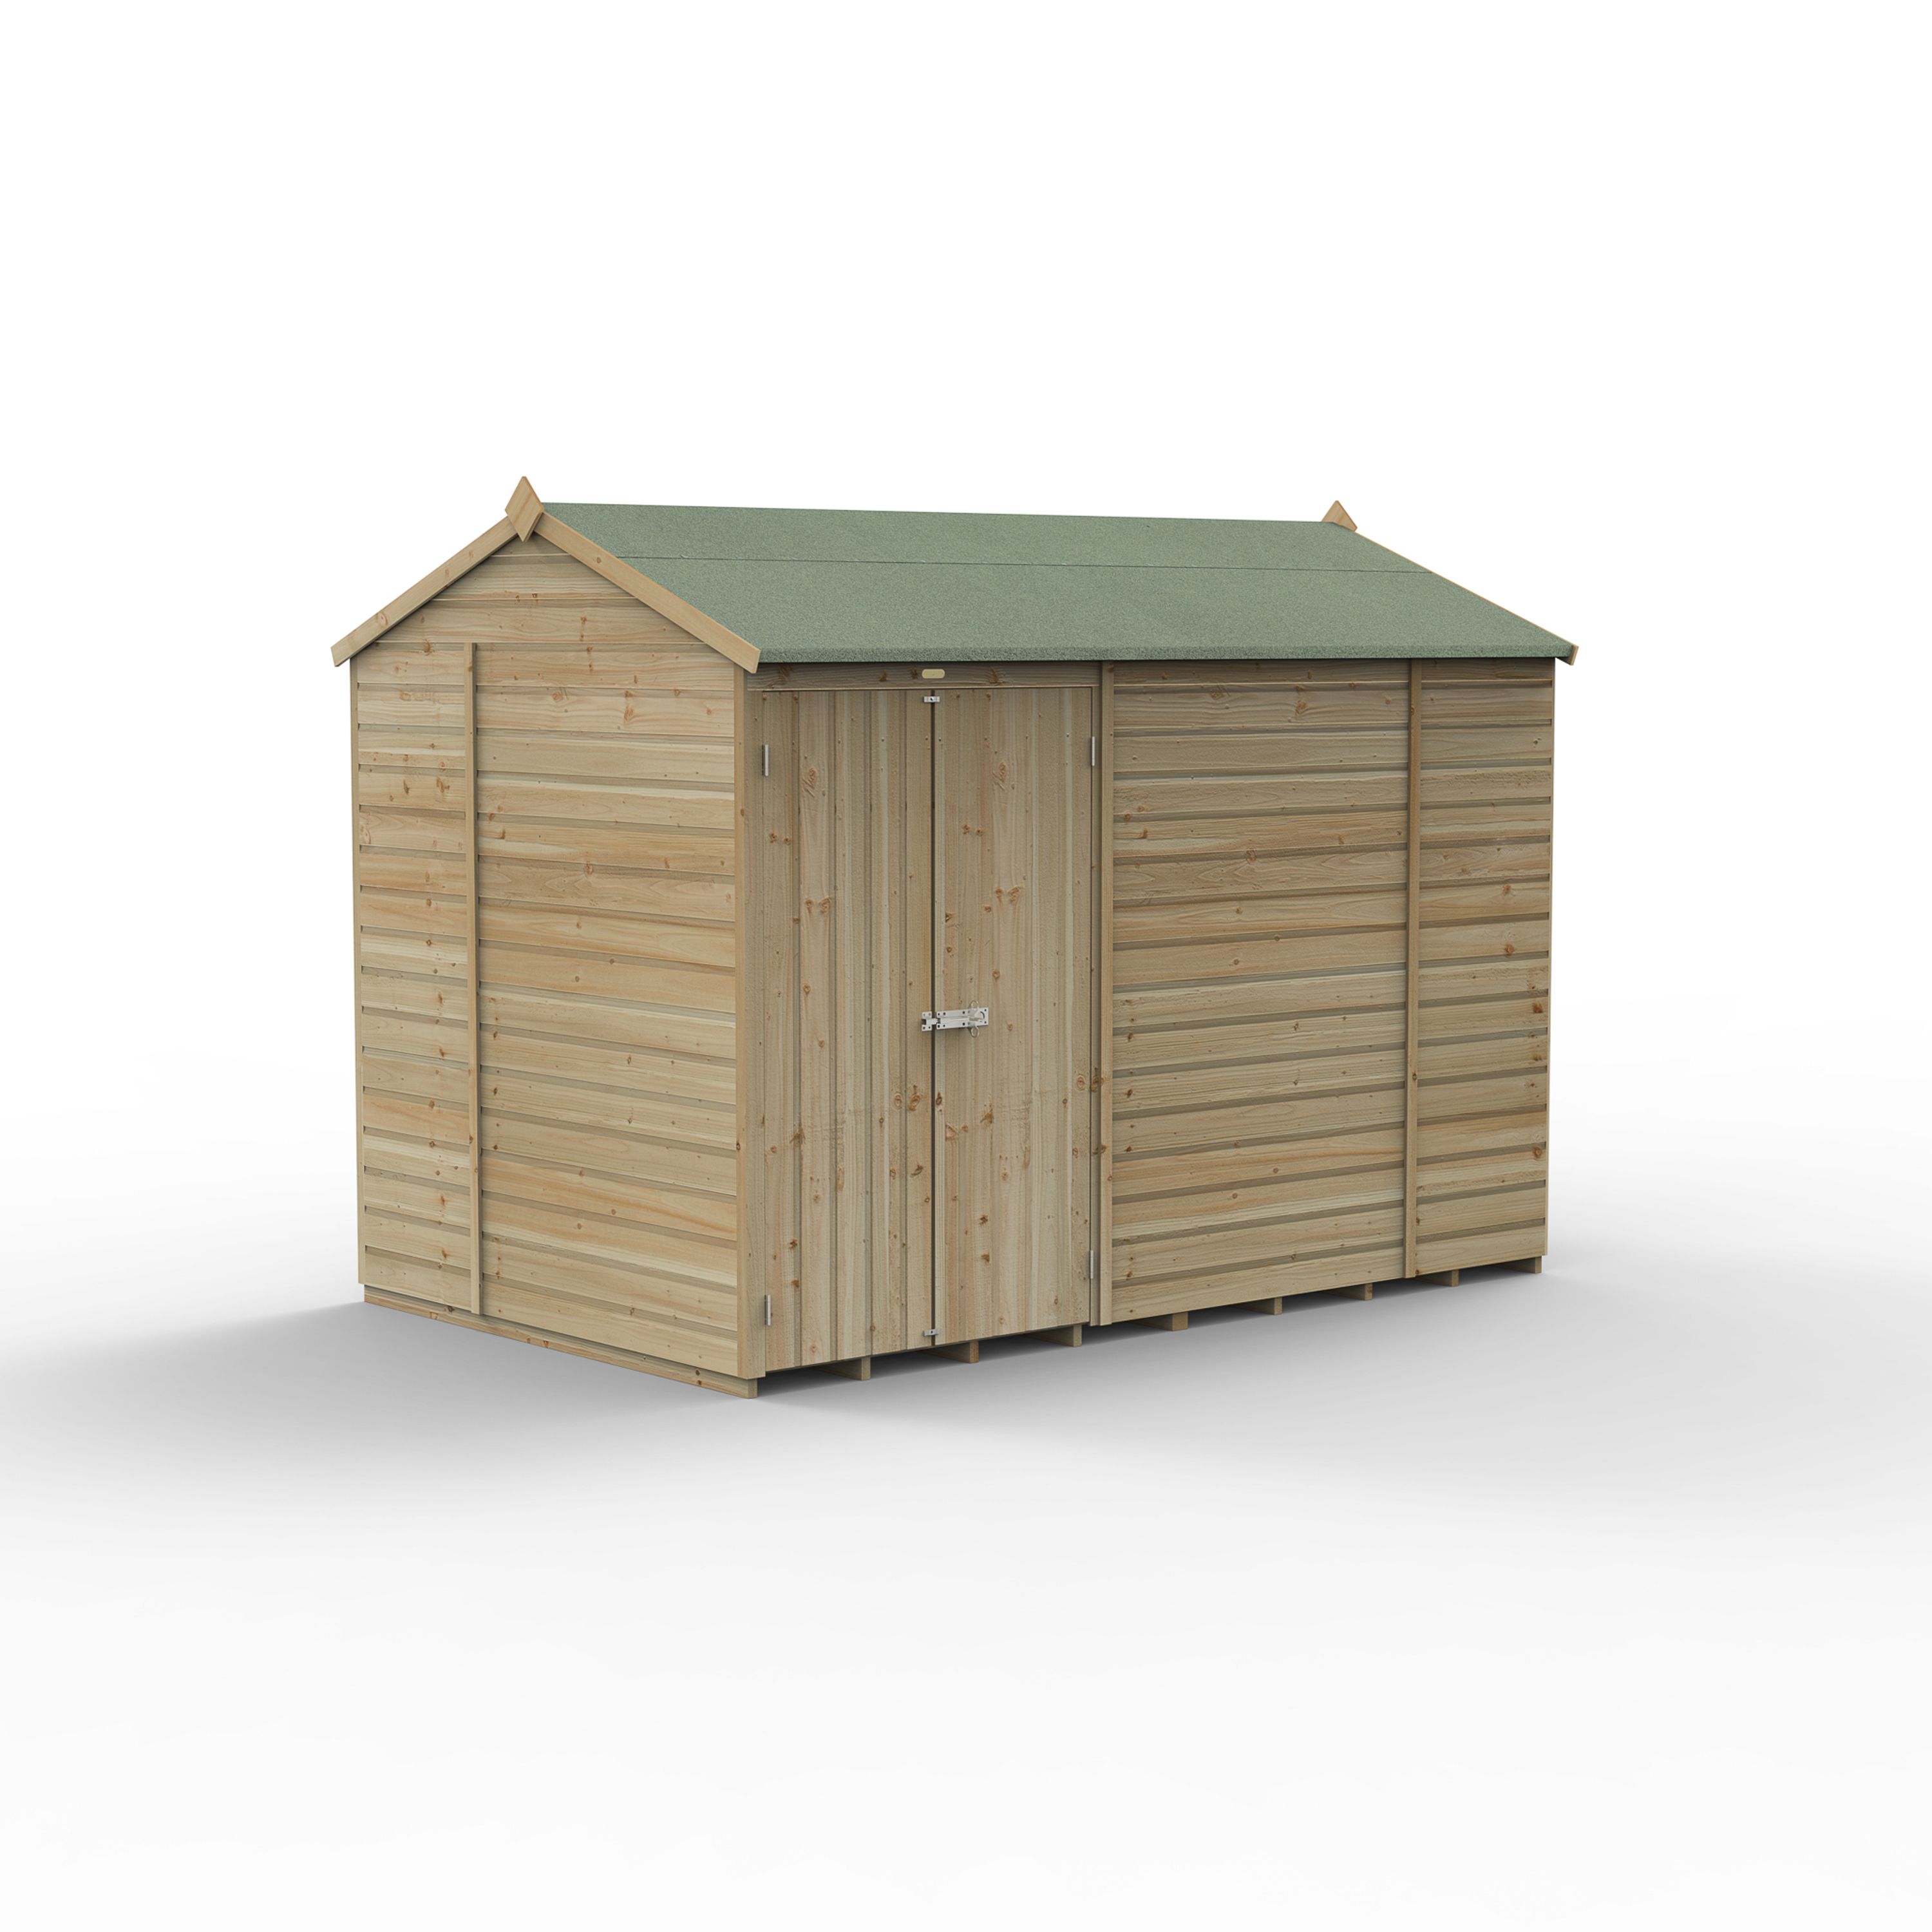 Forest Garden Beckwood 10x6 ft Reverse apex Natural timber Wooden 2 door Shed with floor (Base included)